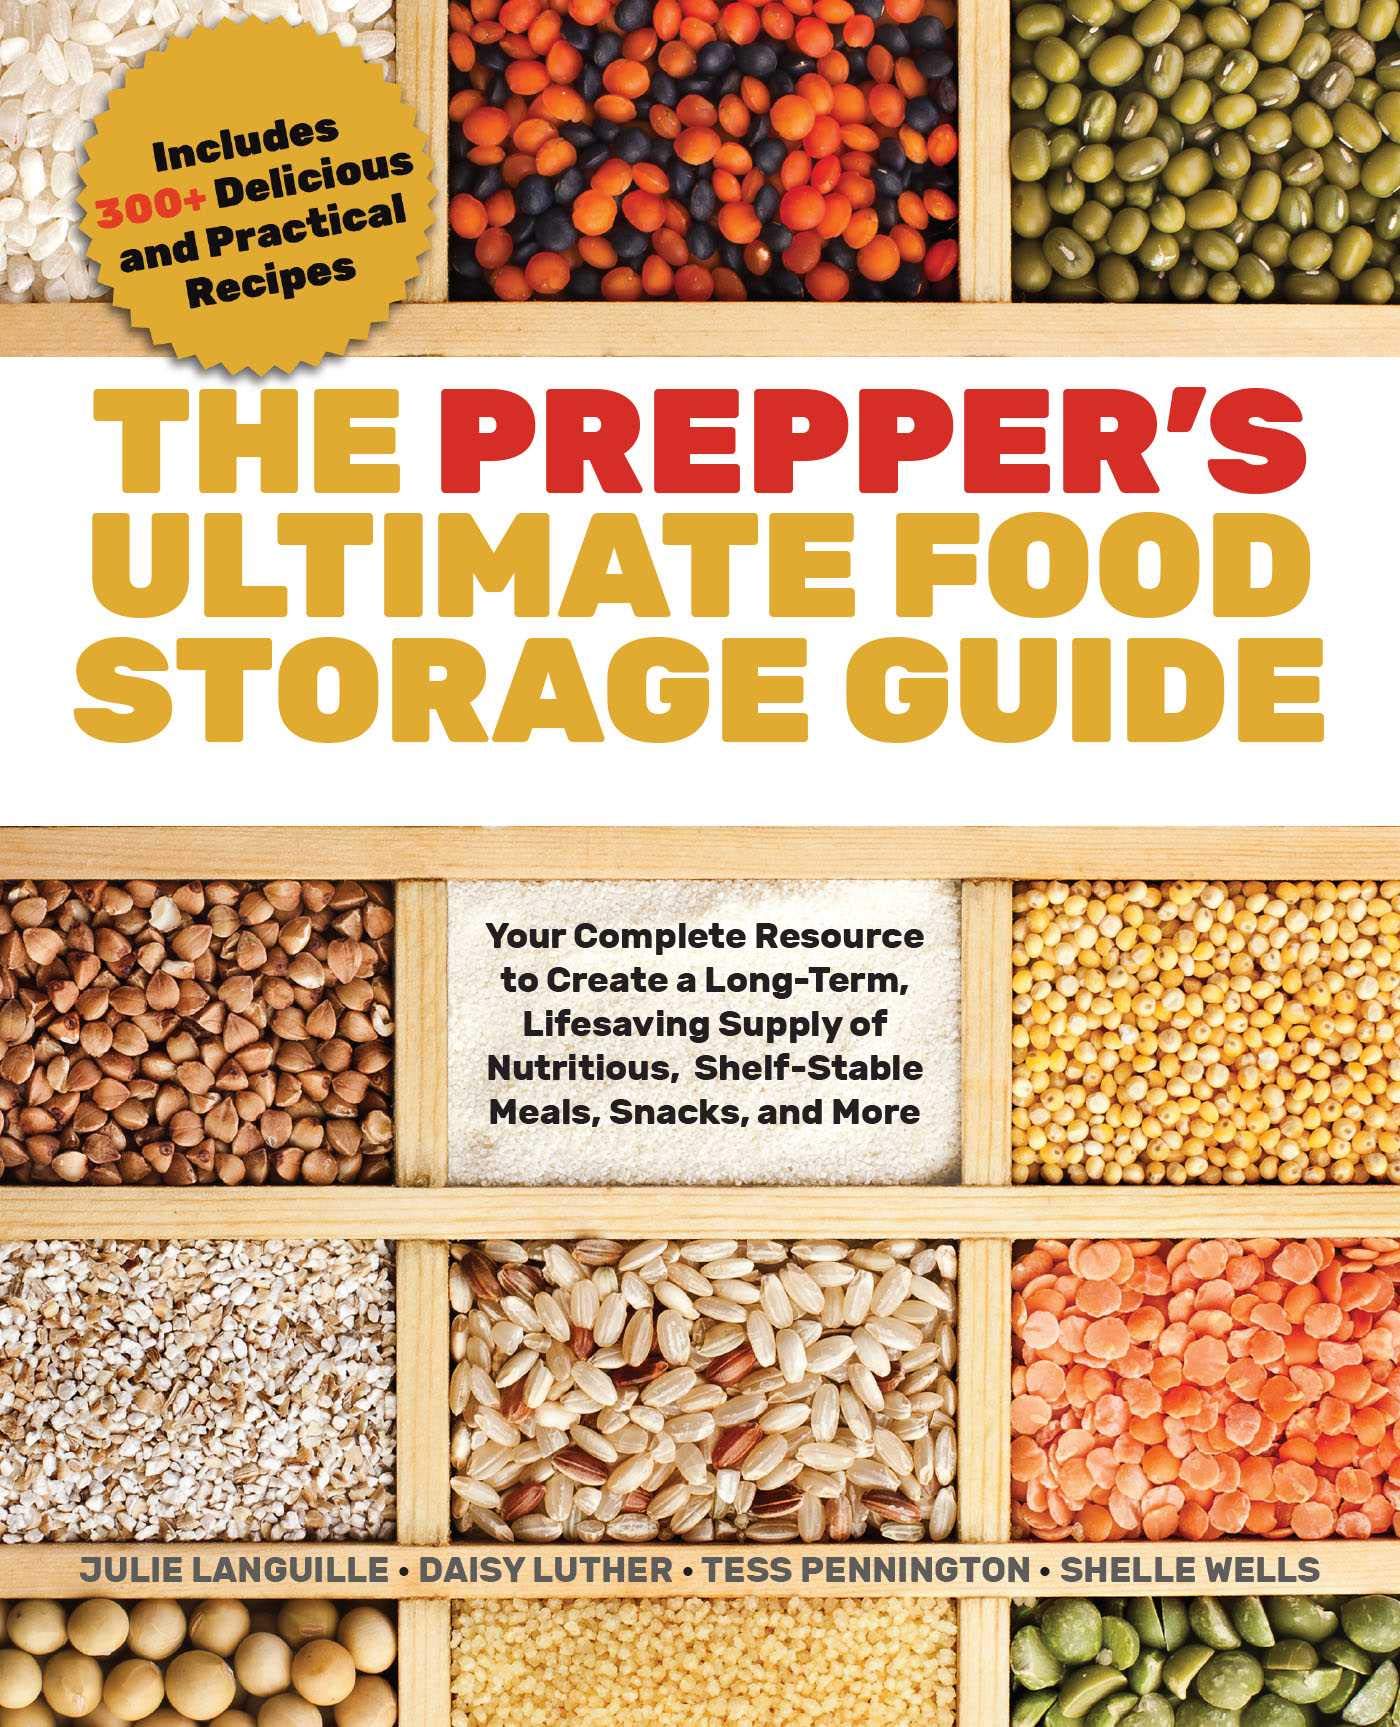 The Prepper’s Ultimate Food-Storage Guide: Your Complete Resource to Create a Long-Term, Lifesaving Supply of Nutritious, Shelf-Stable Meals, Snacks, and More